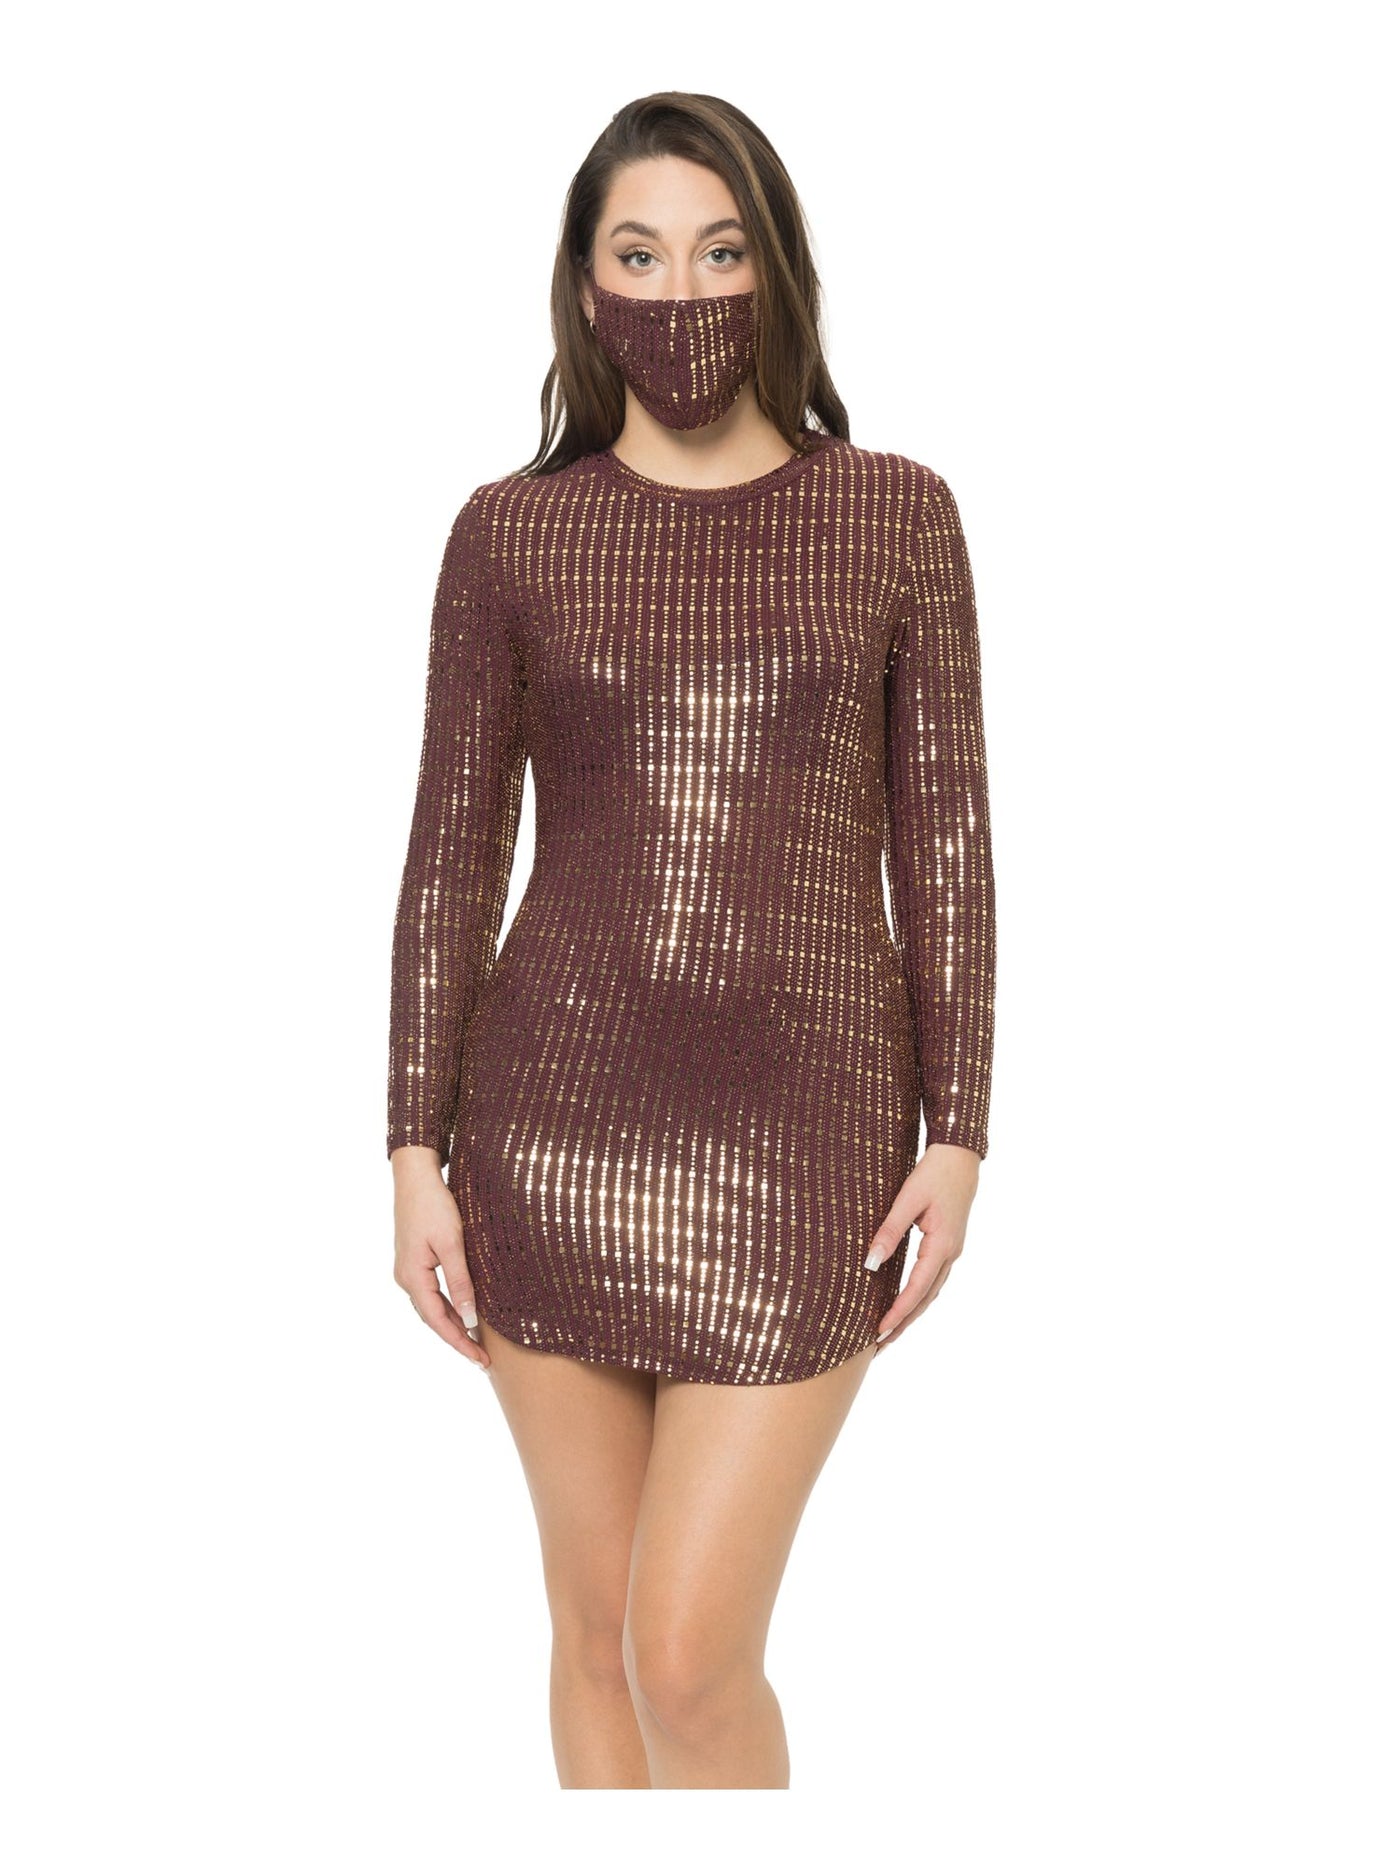 B DARLIN Womens Burgundy Sequined With Mask Long Sleeve Crew Neck Micro Mini Party Body Con Dress Juniors S